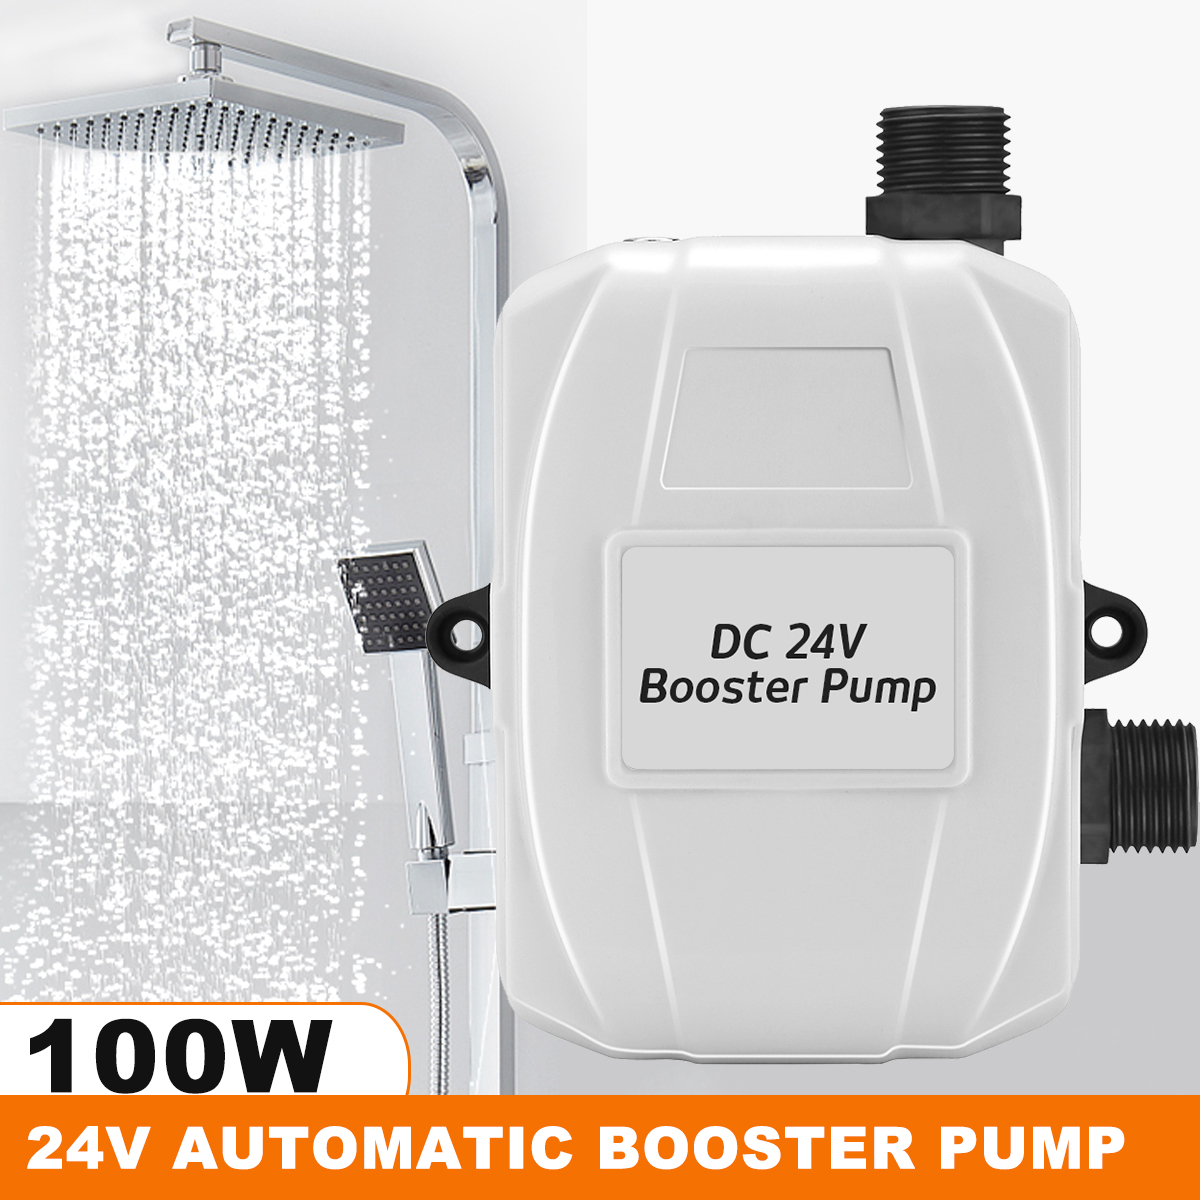 DC-24V-100W-Household-Booster-Pump-Integrated-Booster-Pump-Connector-1904969-1